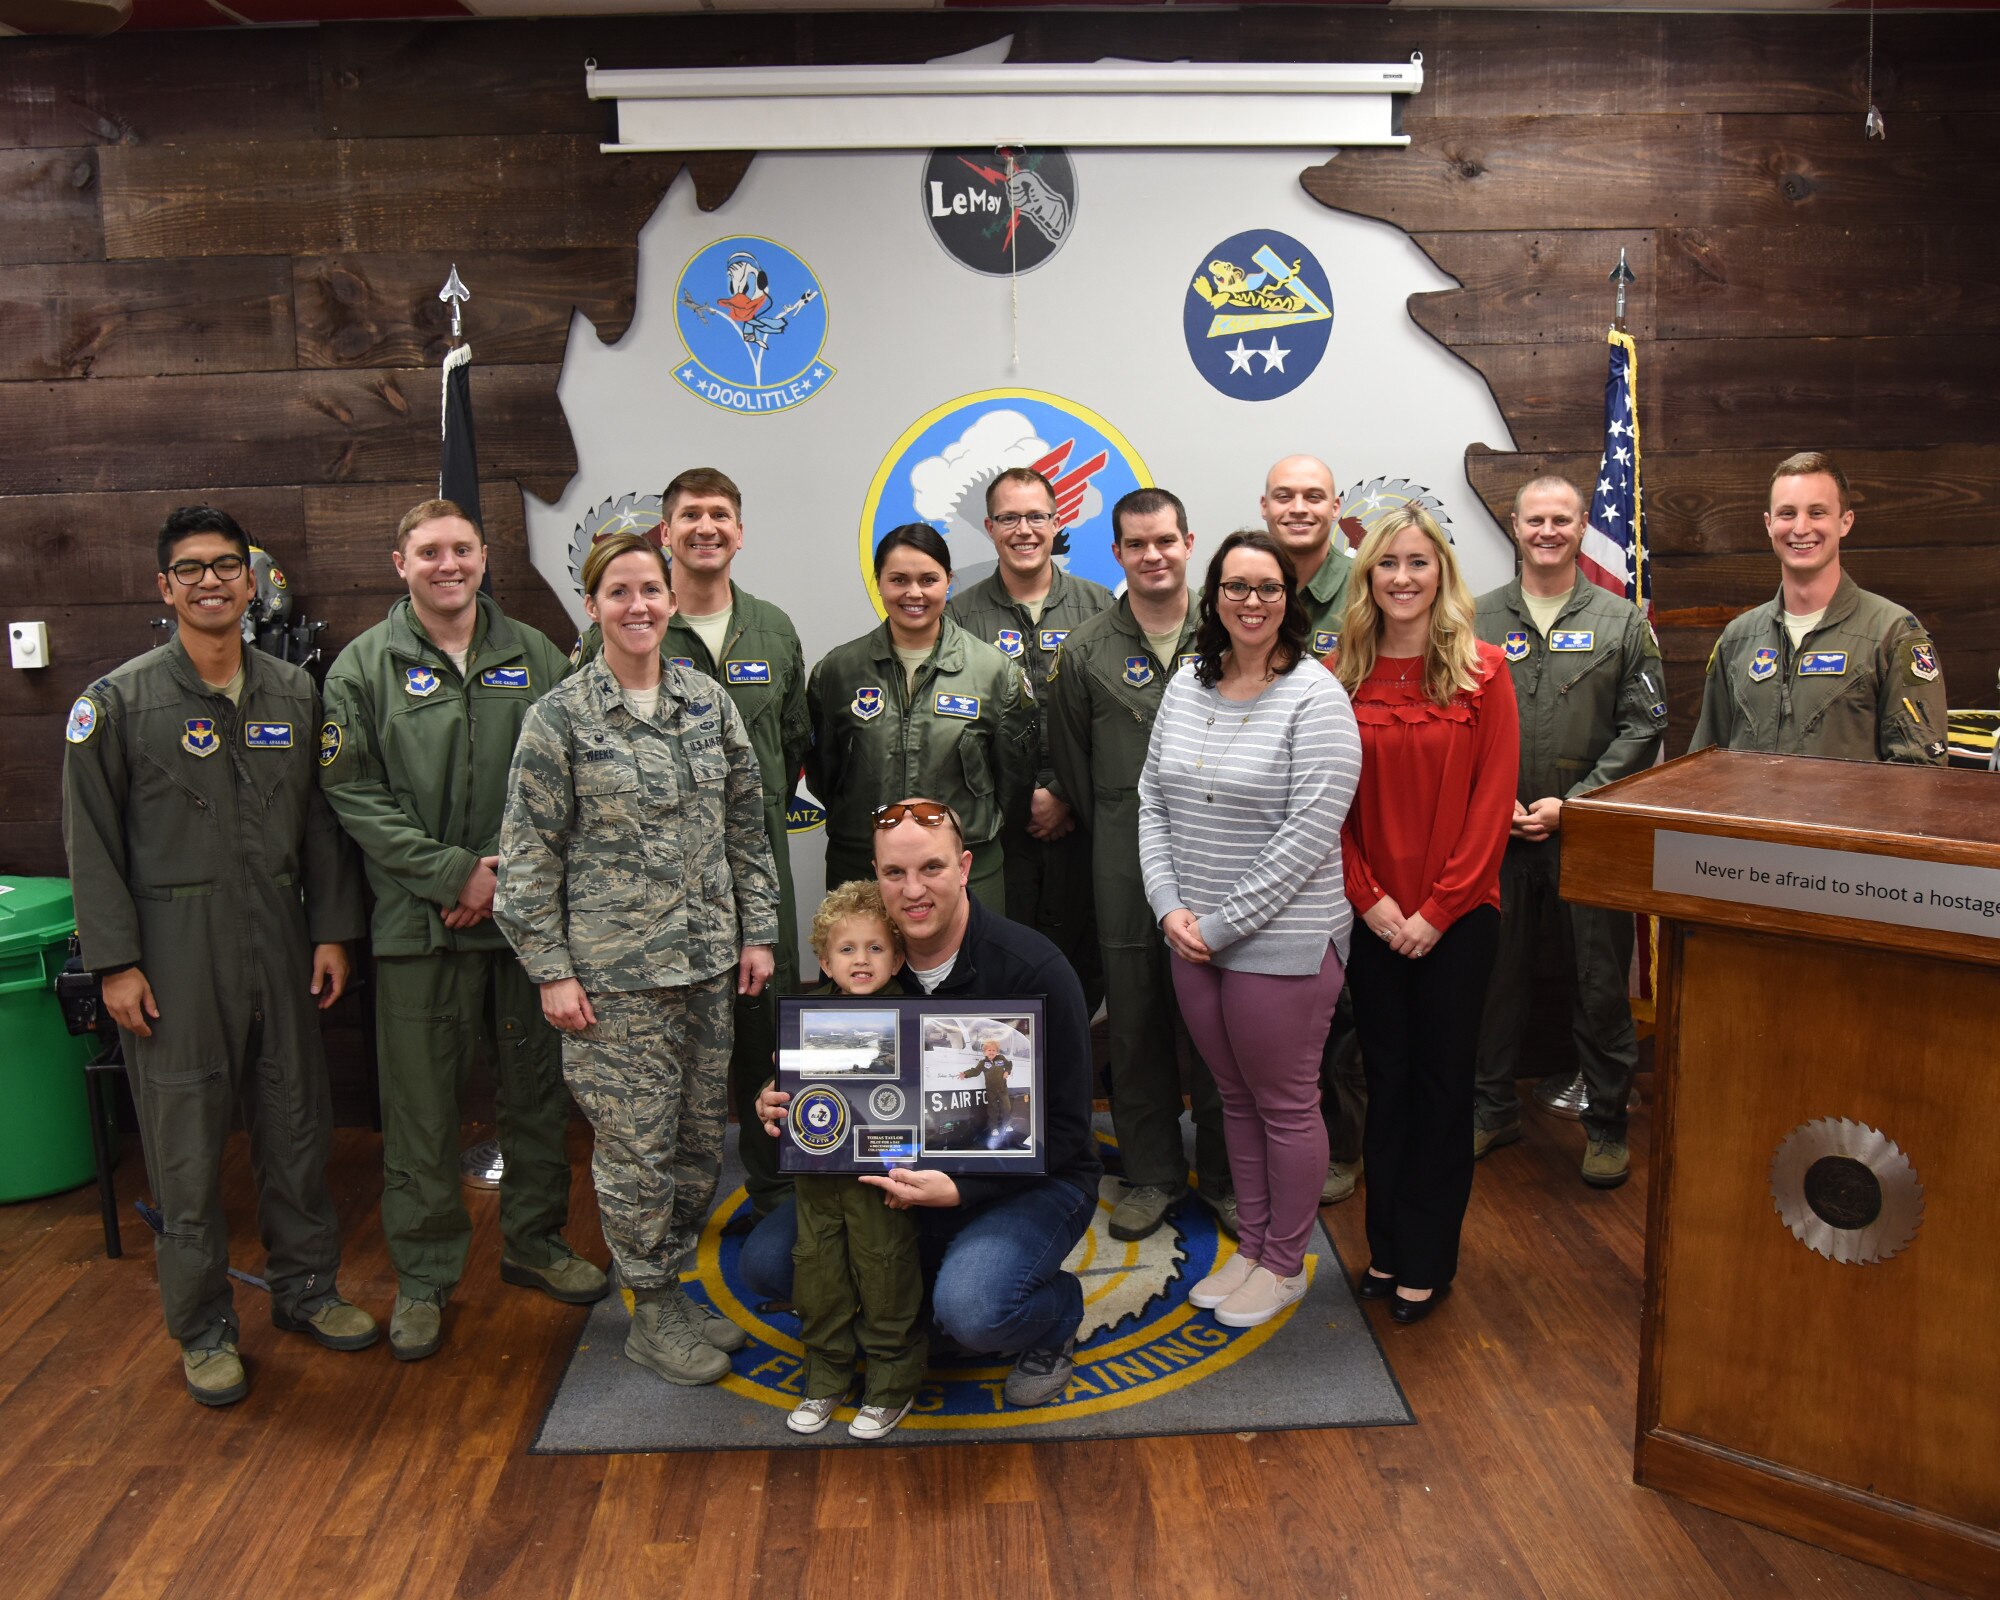 Tobias Taylor, Pilot for a Day, and his family pose with members of Team BLAZE and local business leaders Dec. 6, 2018, on Columbus Air Force Base, Mississippi. Pilot for a Day is a program where medically disabled youth get a “red carpet day” custom-tailored to their desires and capabilities. (U.S. Air Force photo by Melissa Doublin)